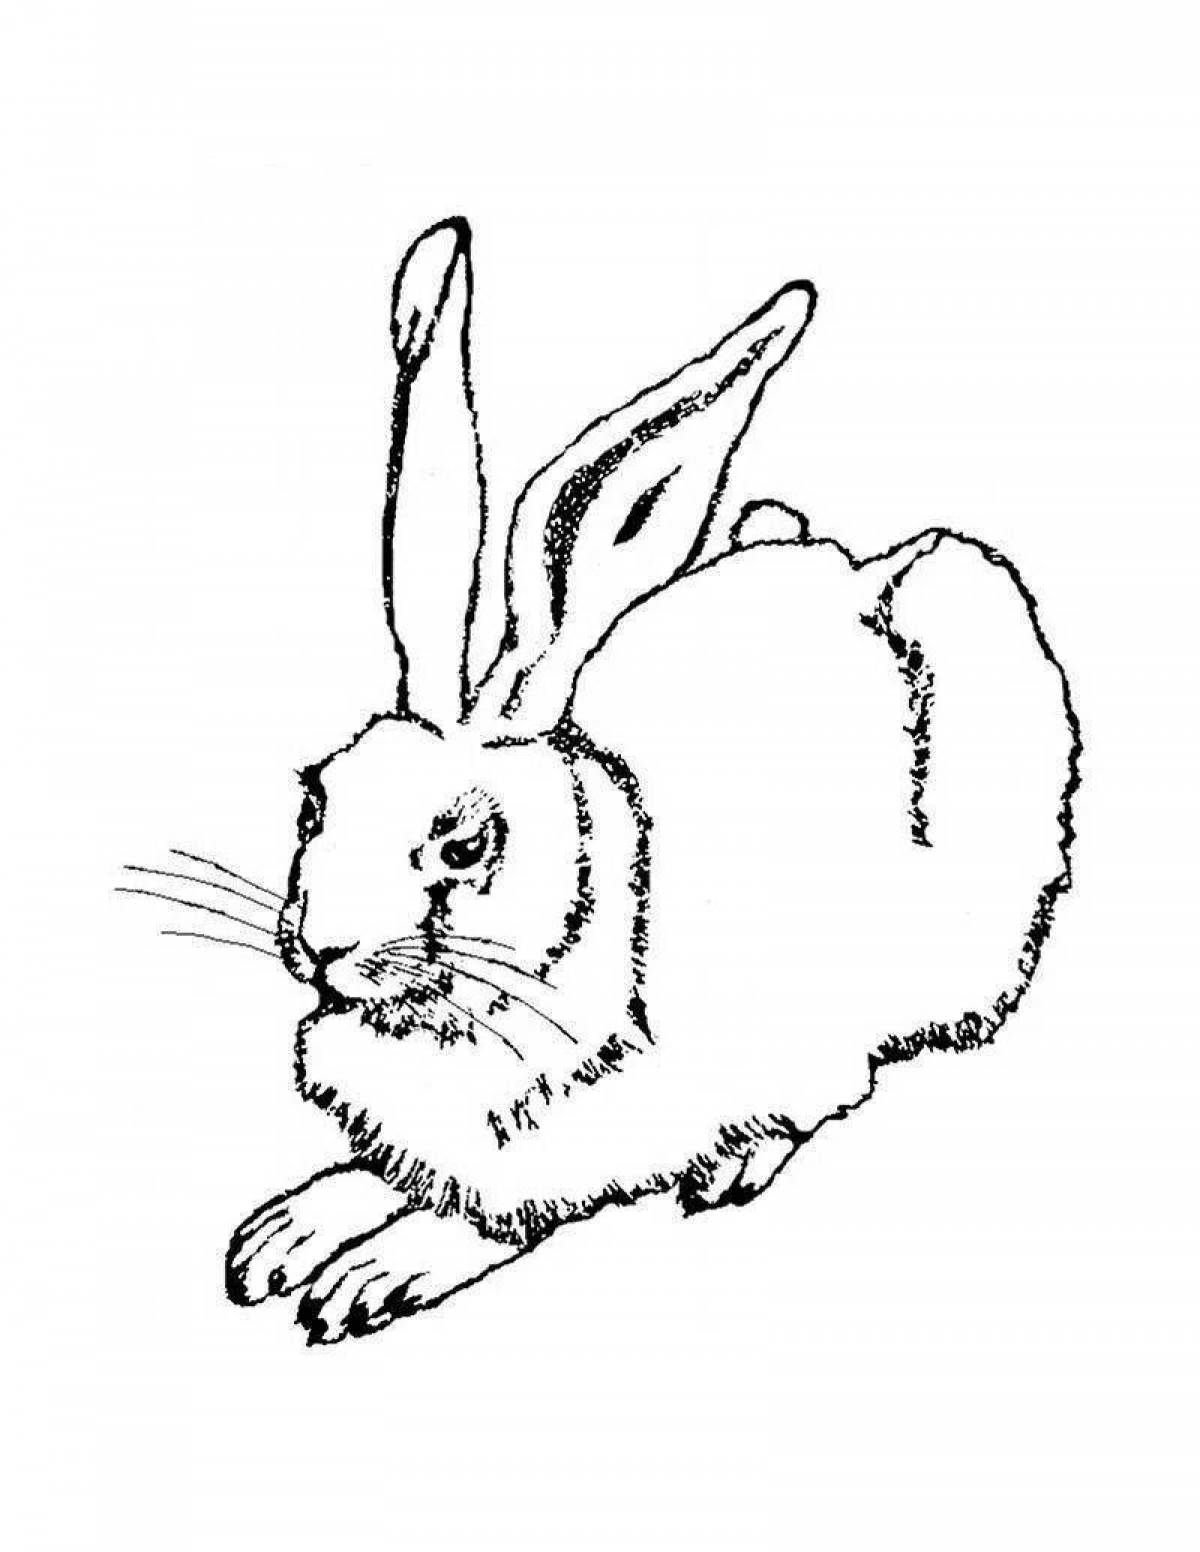 Intriguing drawing of a hare